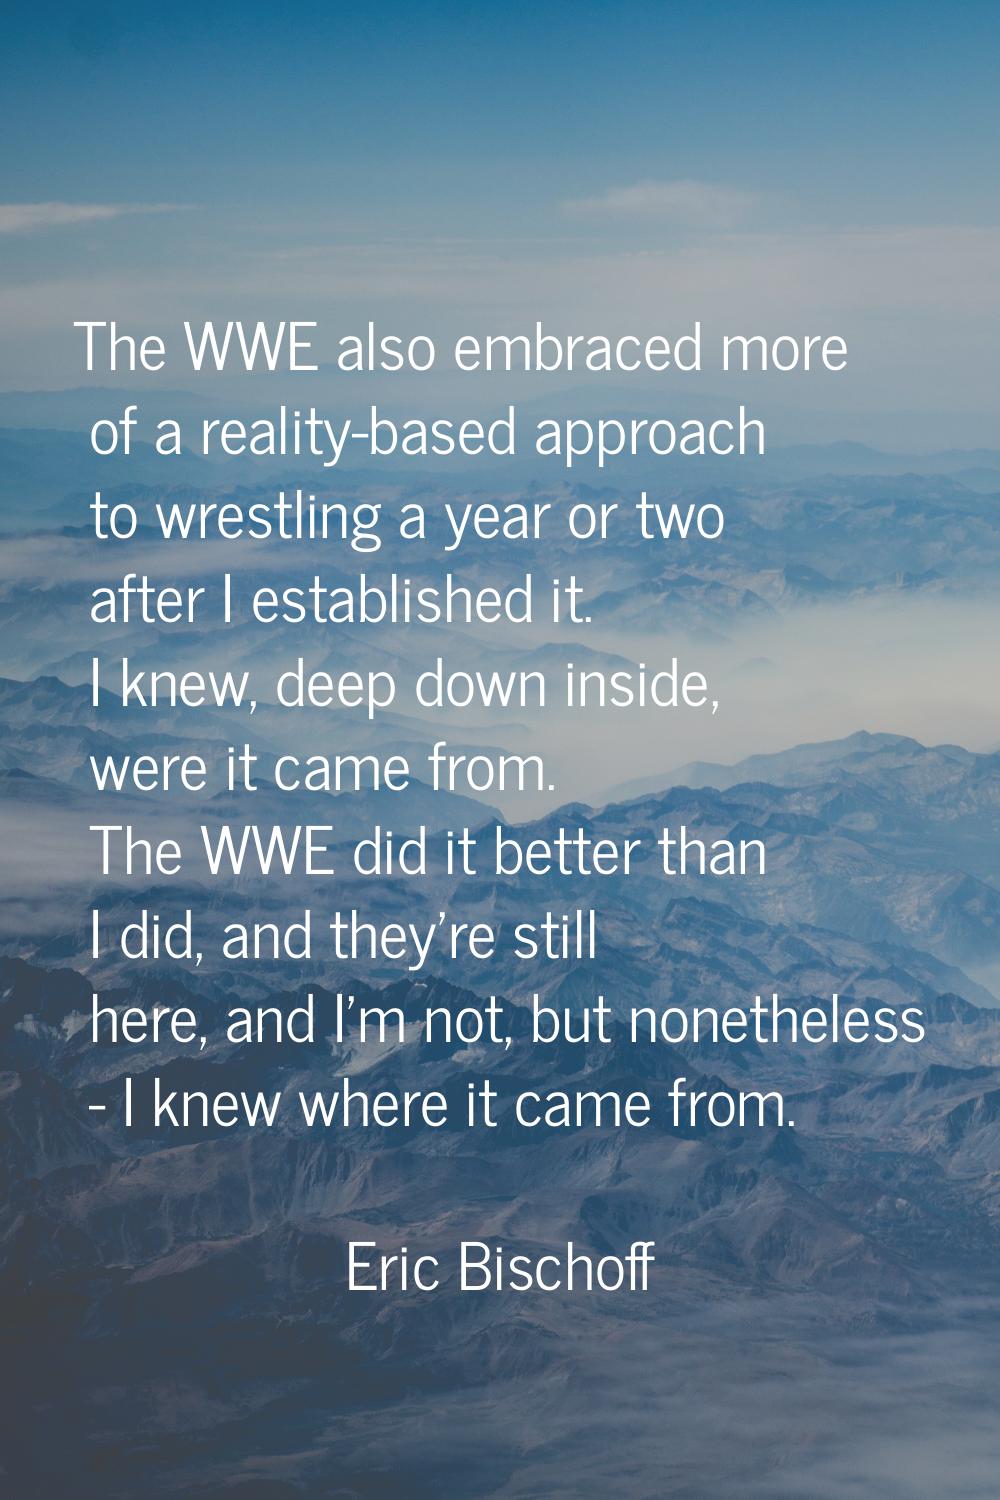 The WWE also embraced more of a reality-based approach to wrestling a year or two after I establish